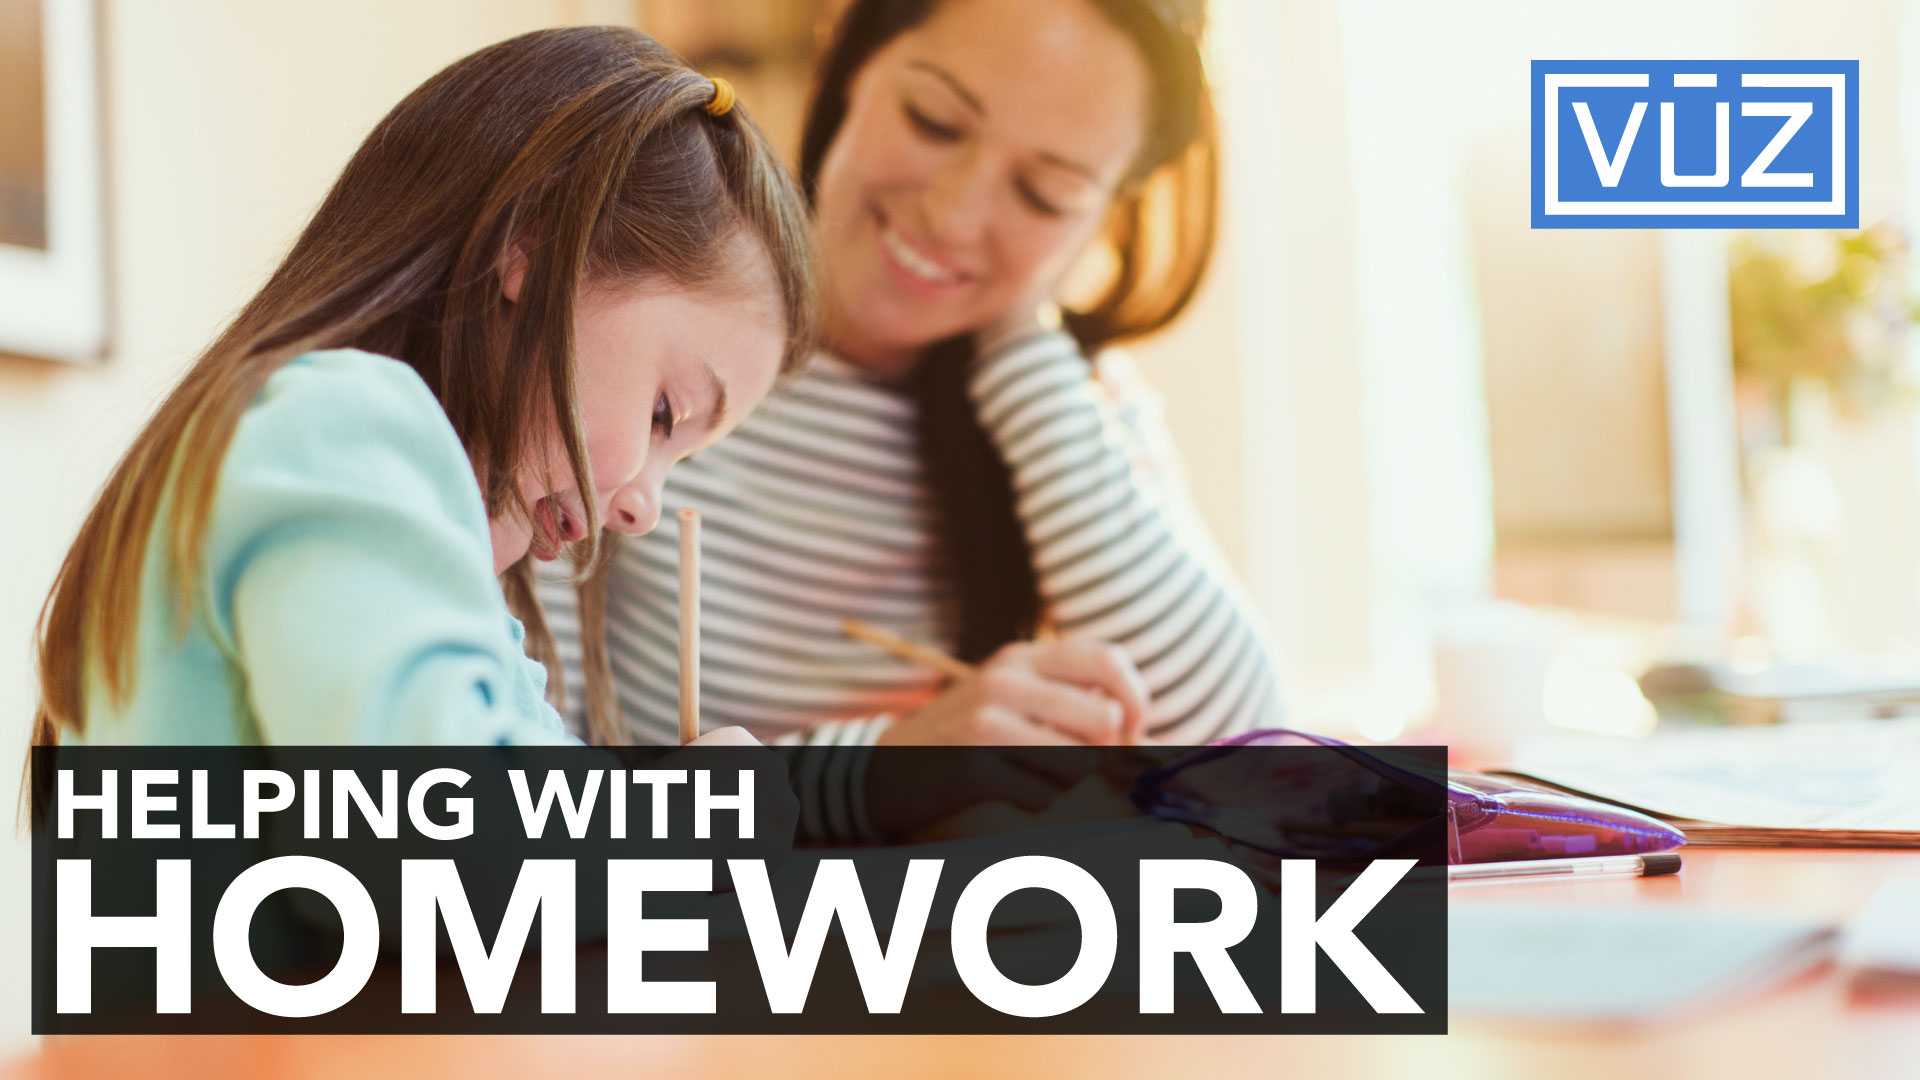 Helping your child with homework may actually be hurting them